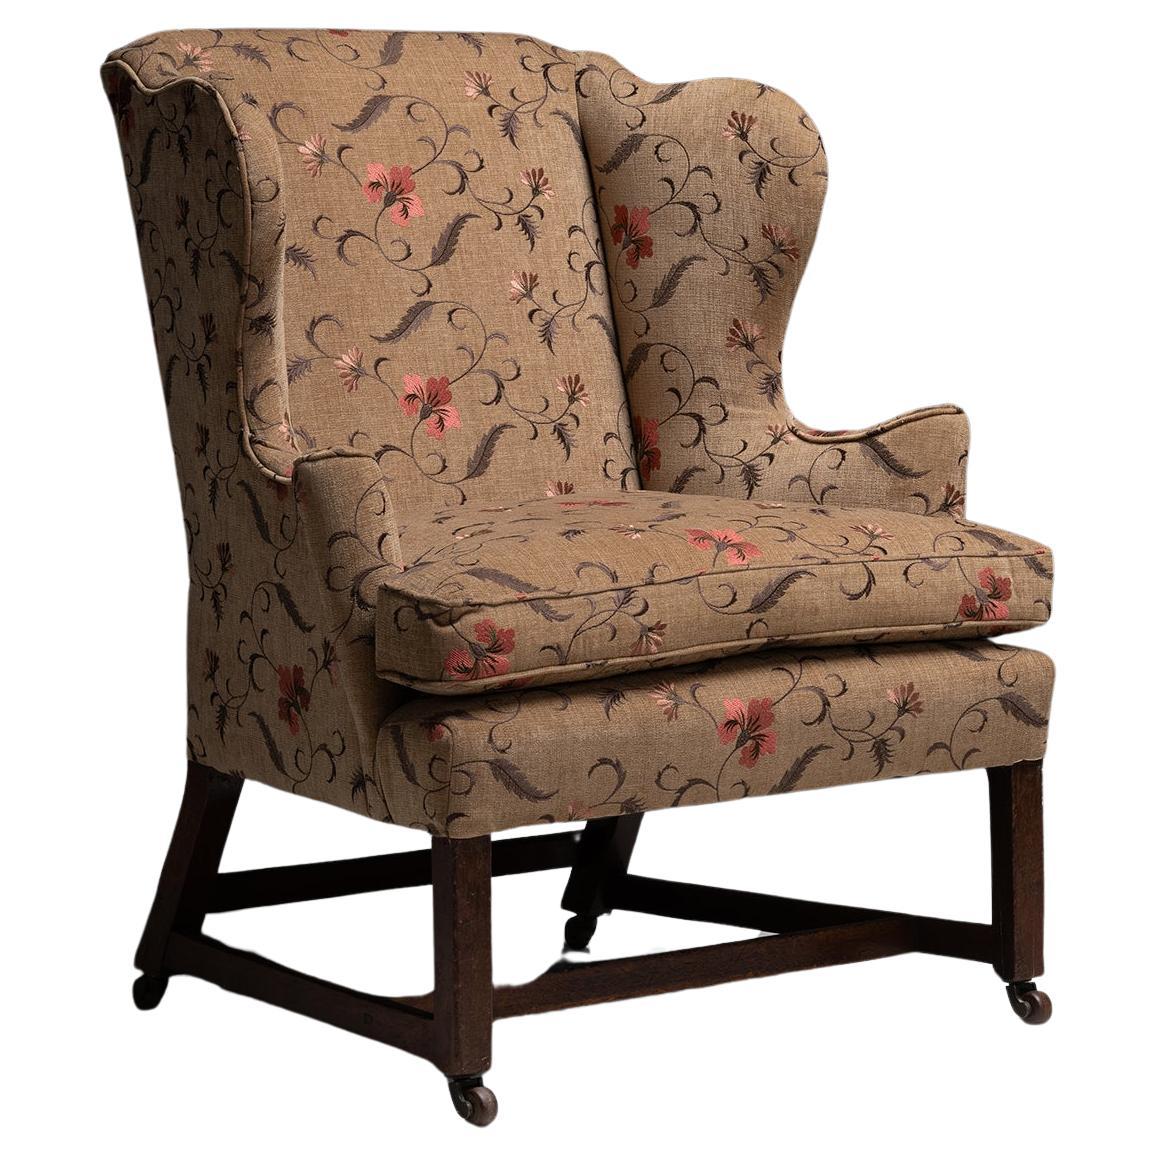 Wingback Chair in Embroidered Linen, England circa 1830